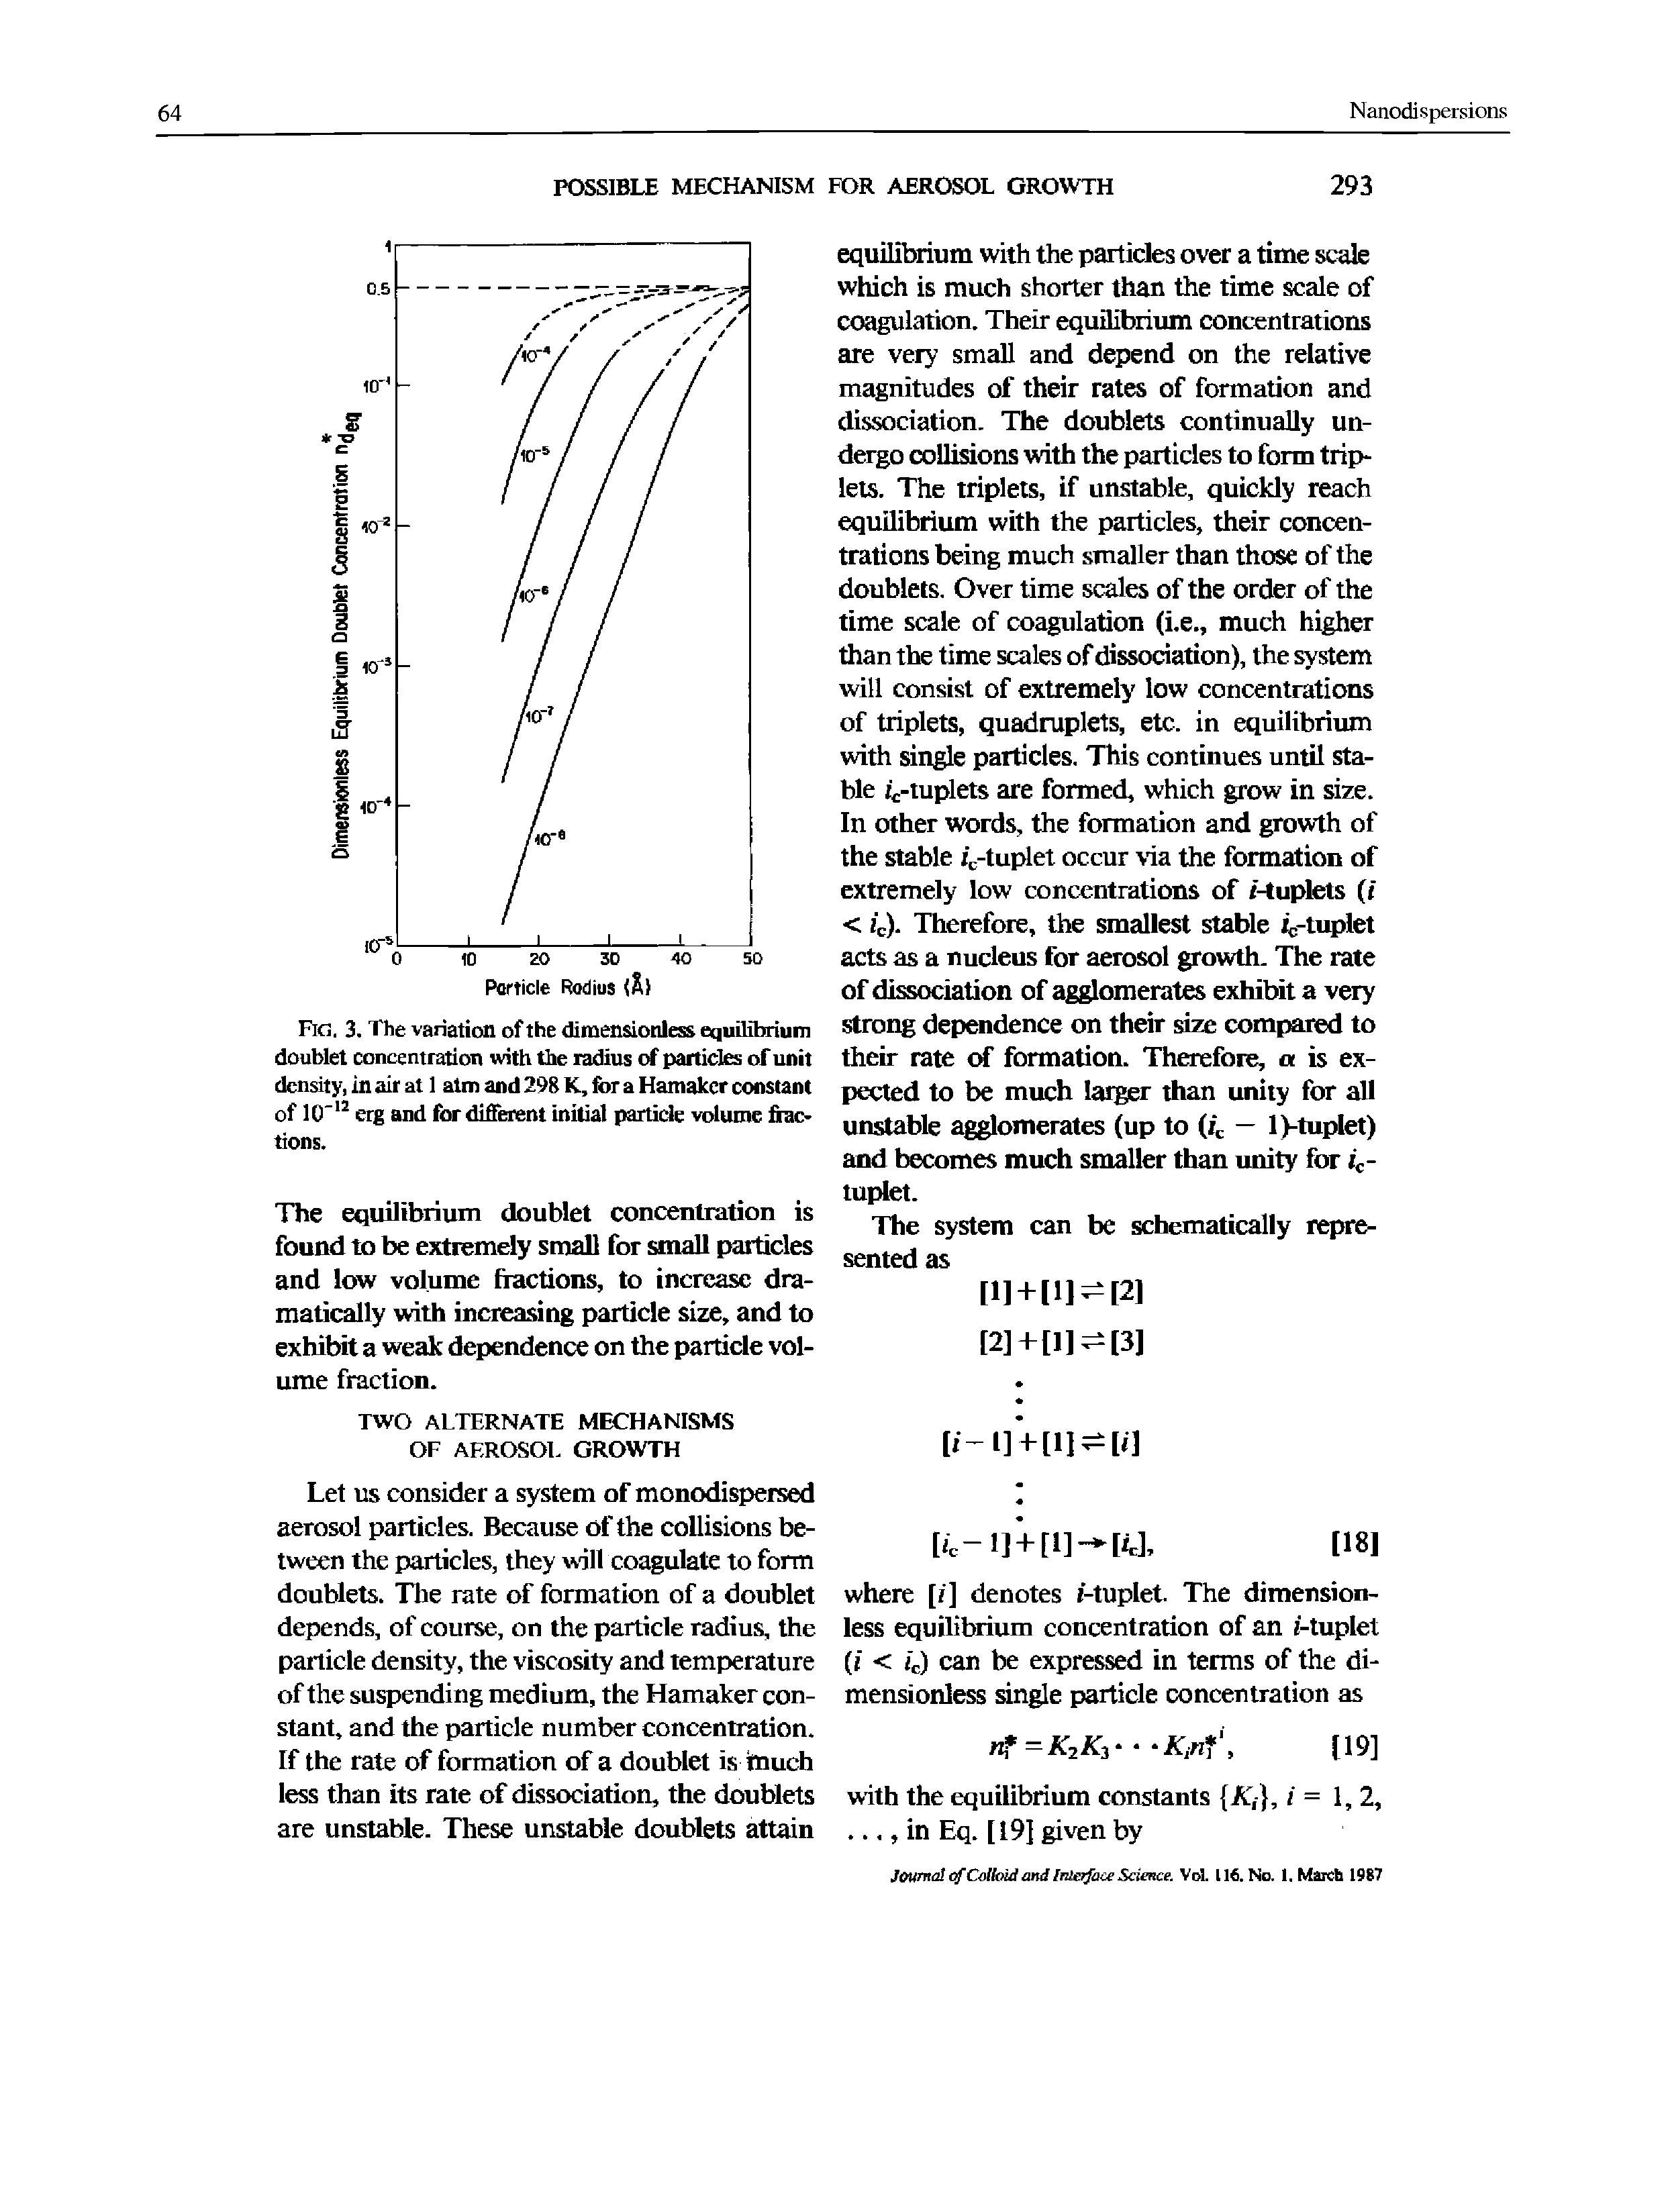 Fig. 3. The variation of the dimensionless equilibrium doublet concentration with the radius of particles of unit density, in air at 1 atm and 298 K, for a Hamakcr constant of 10 12 erg and for different initial particle volume fractions.